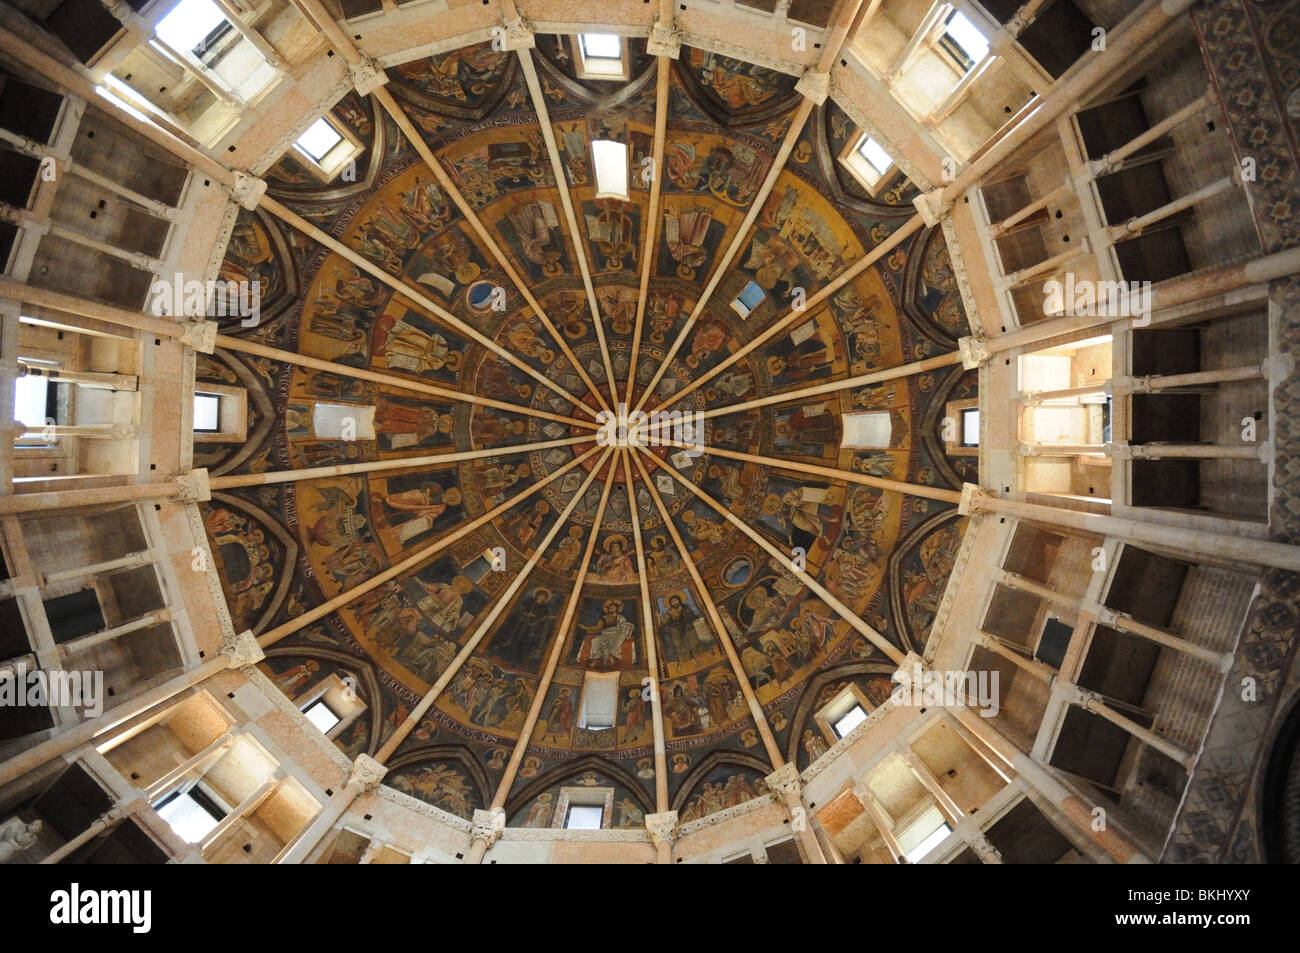 Interior of domed roof of octagonal Baptistry adjacent to il Duomo dell'Assunta Cathedral Parma Emilia Romagna Italy Stock Photo